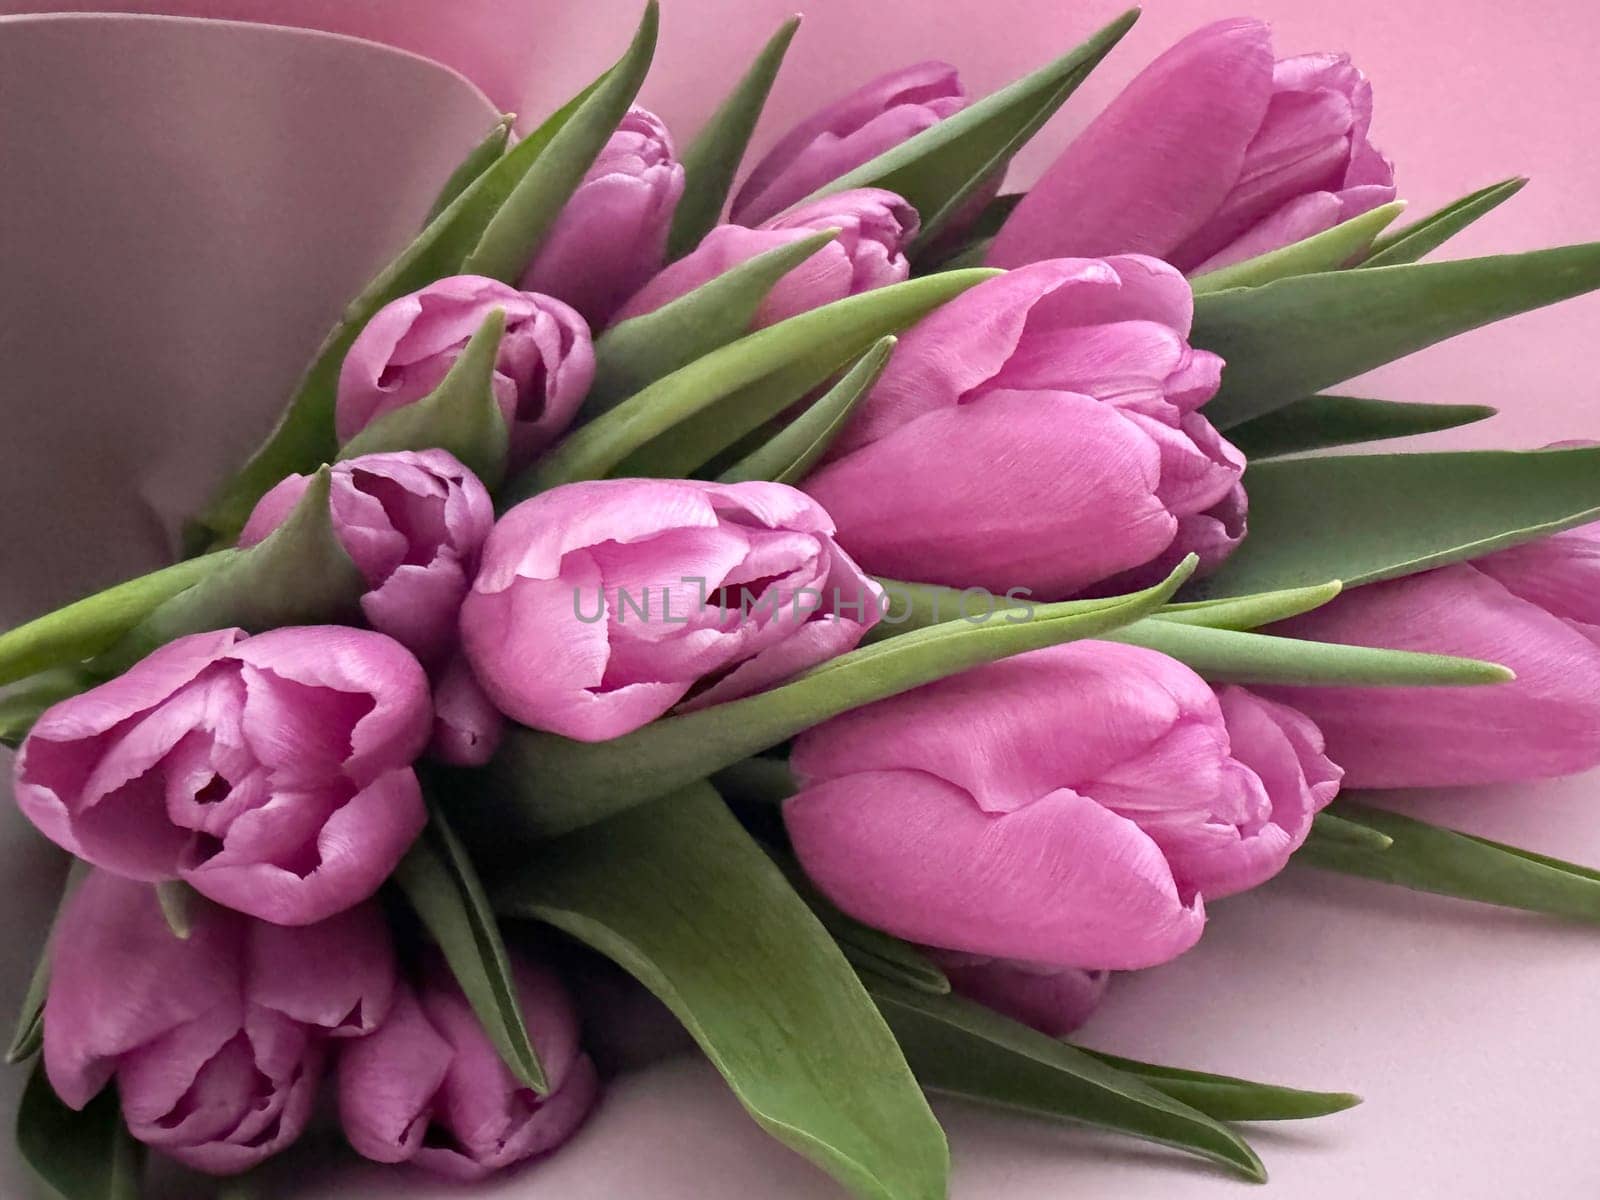 Bouquet of lilac tulips on a soft lilac background close-up by Annado